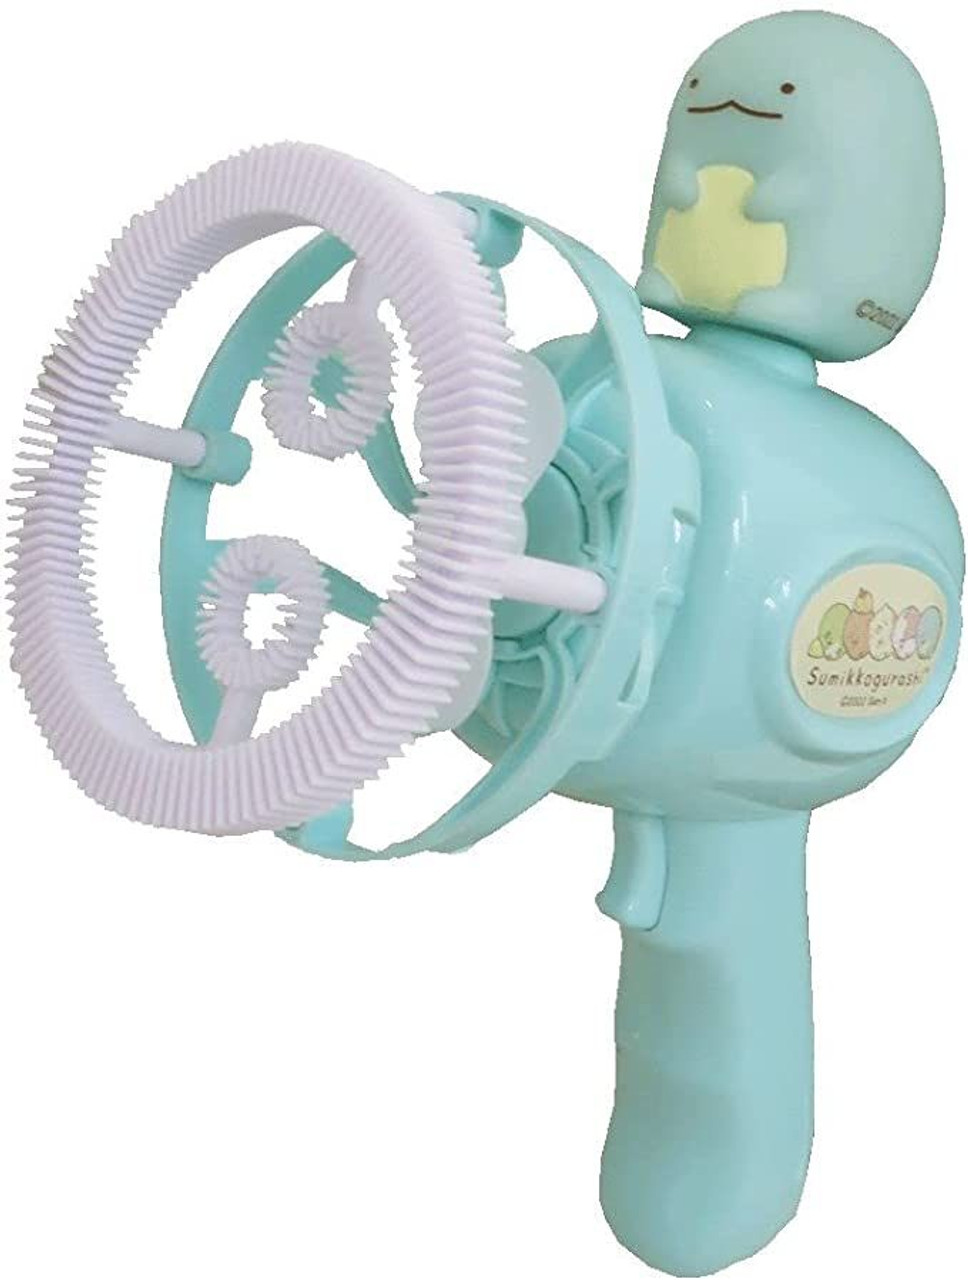 Japanese toys for toddlers: A bubble blowing machine